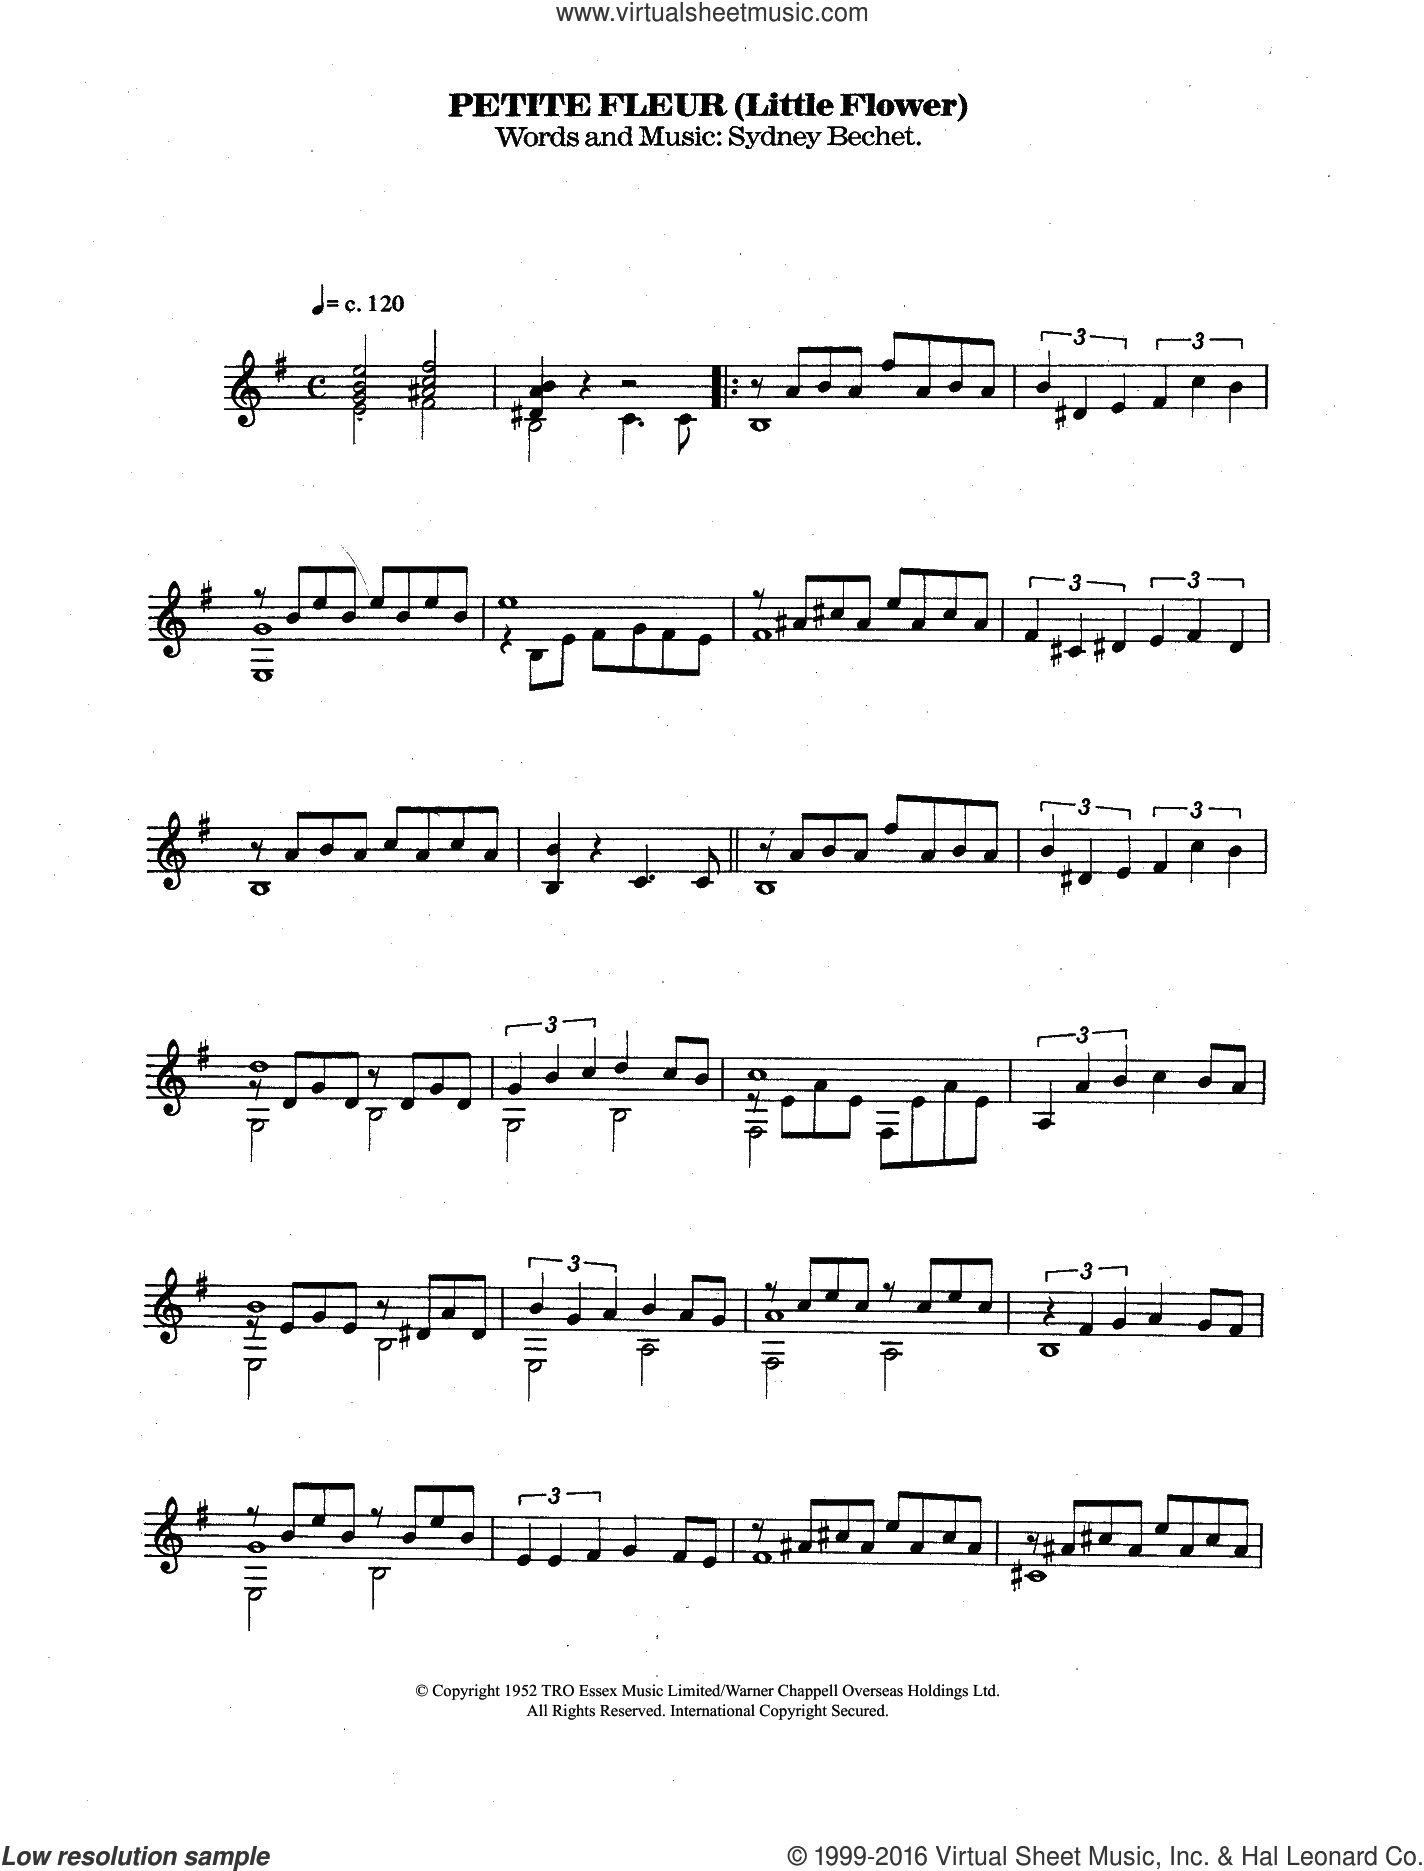 https://cdn3.virtualsheetmusic.com/images/first_pages/HL/HL-332122First_BIG.png